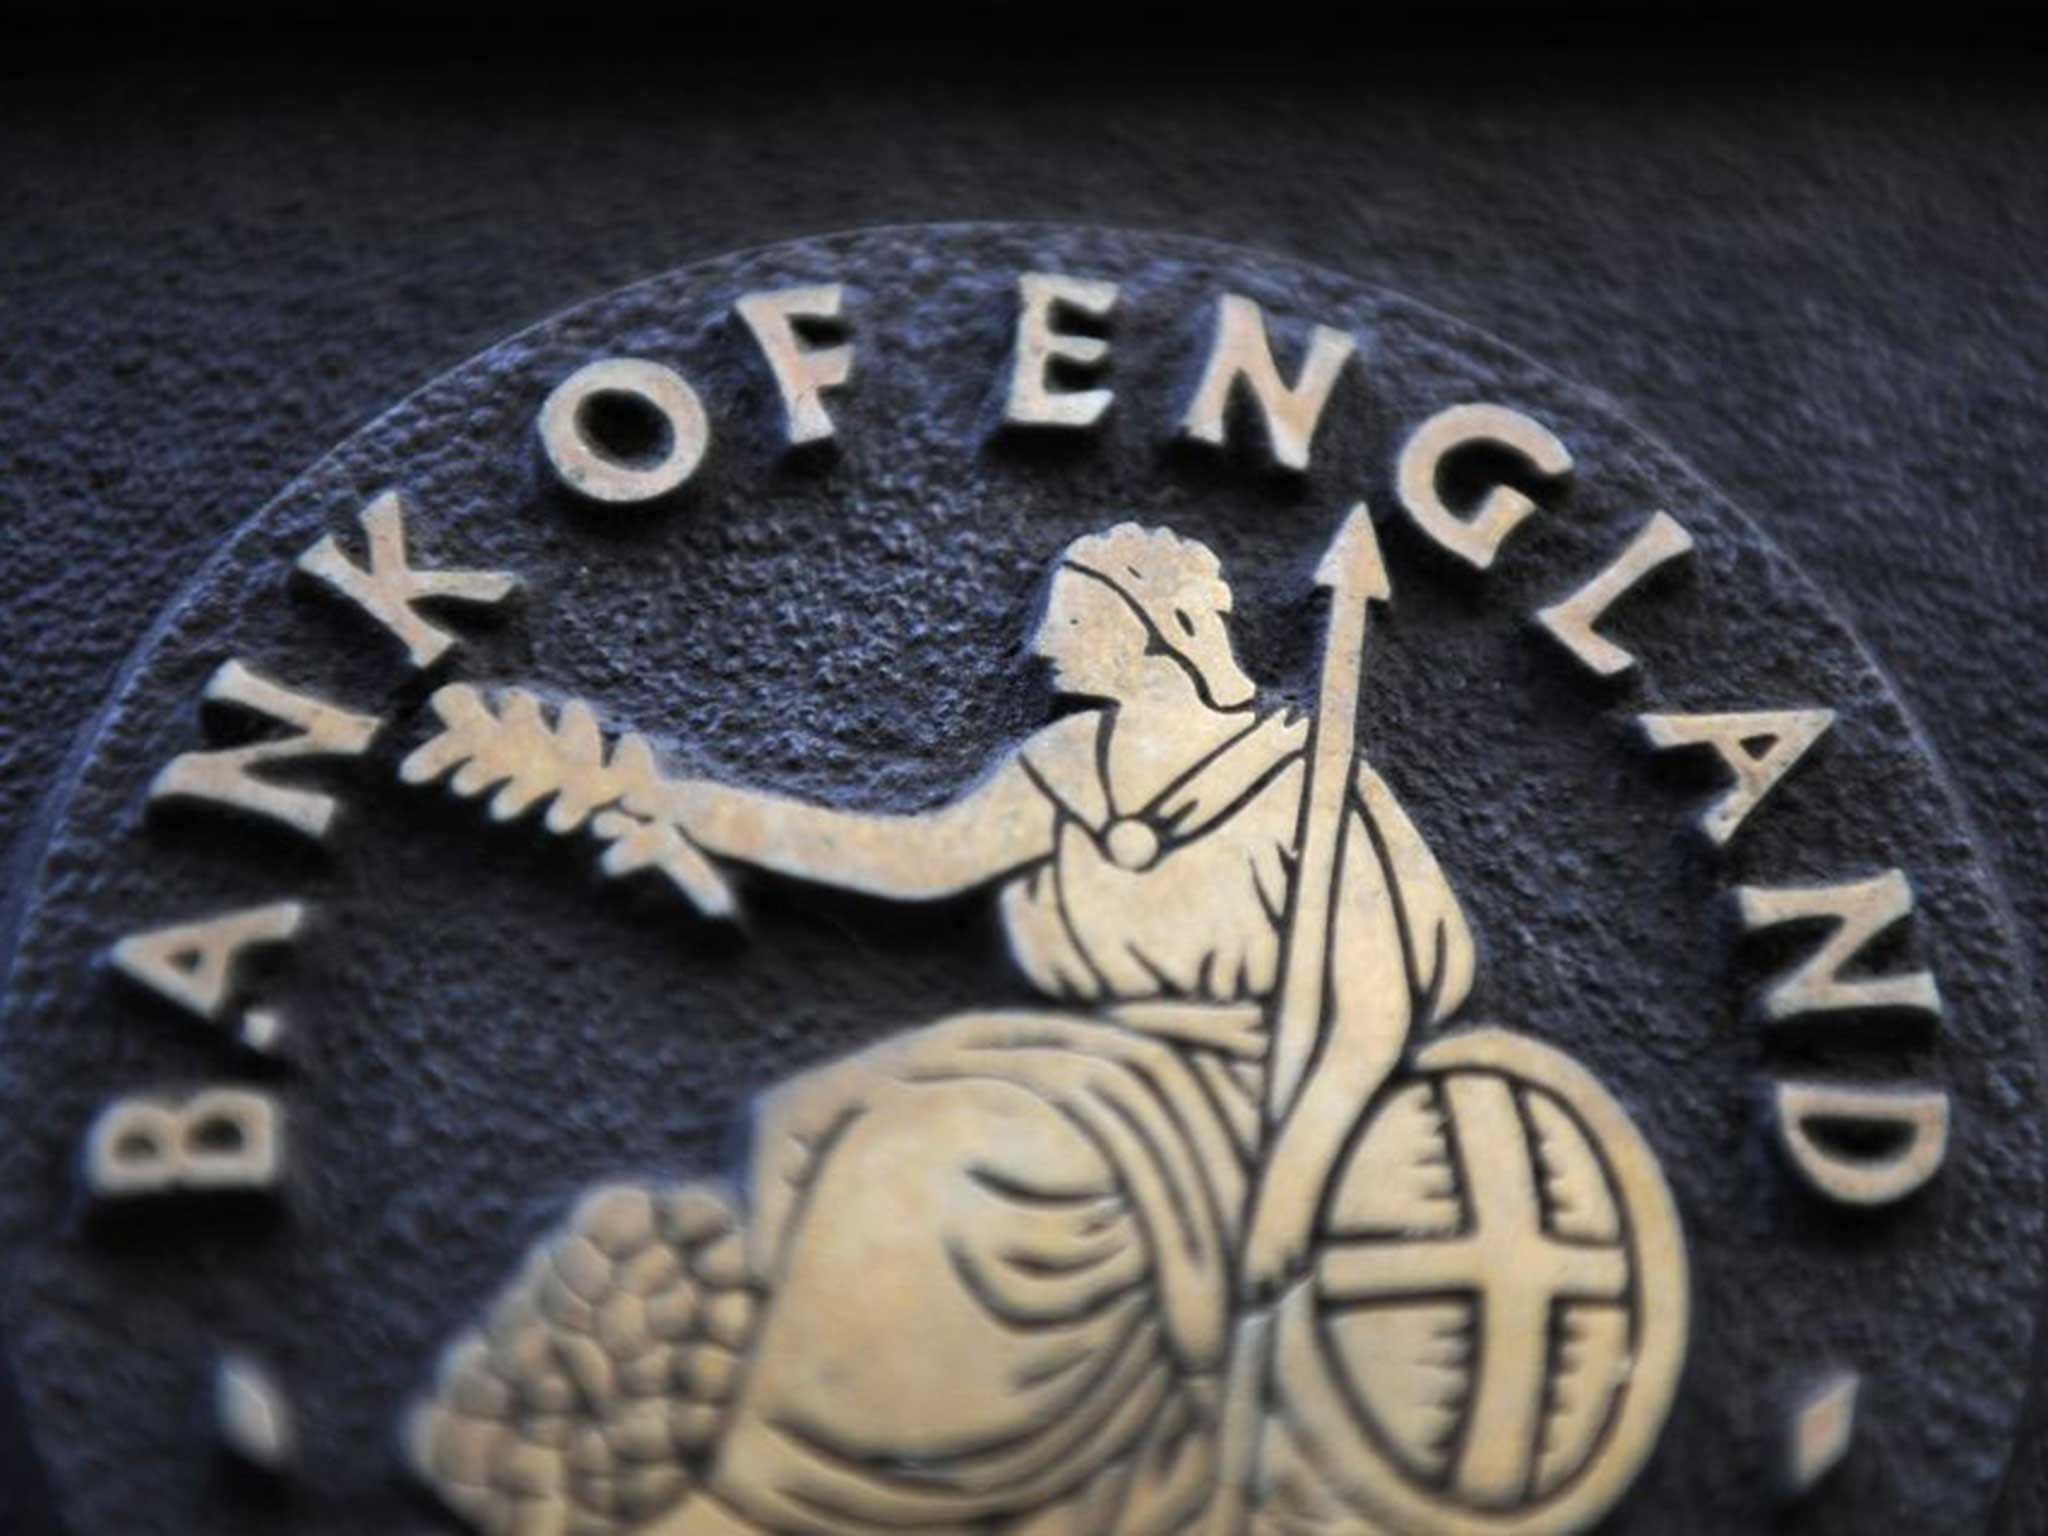 The Bank of England has been embroiled in the scandal